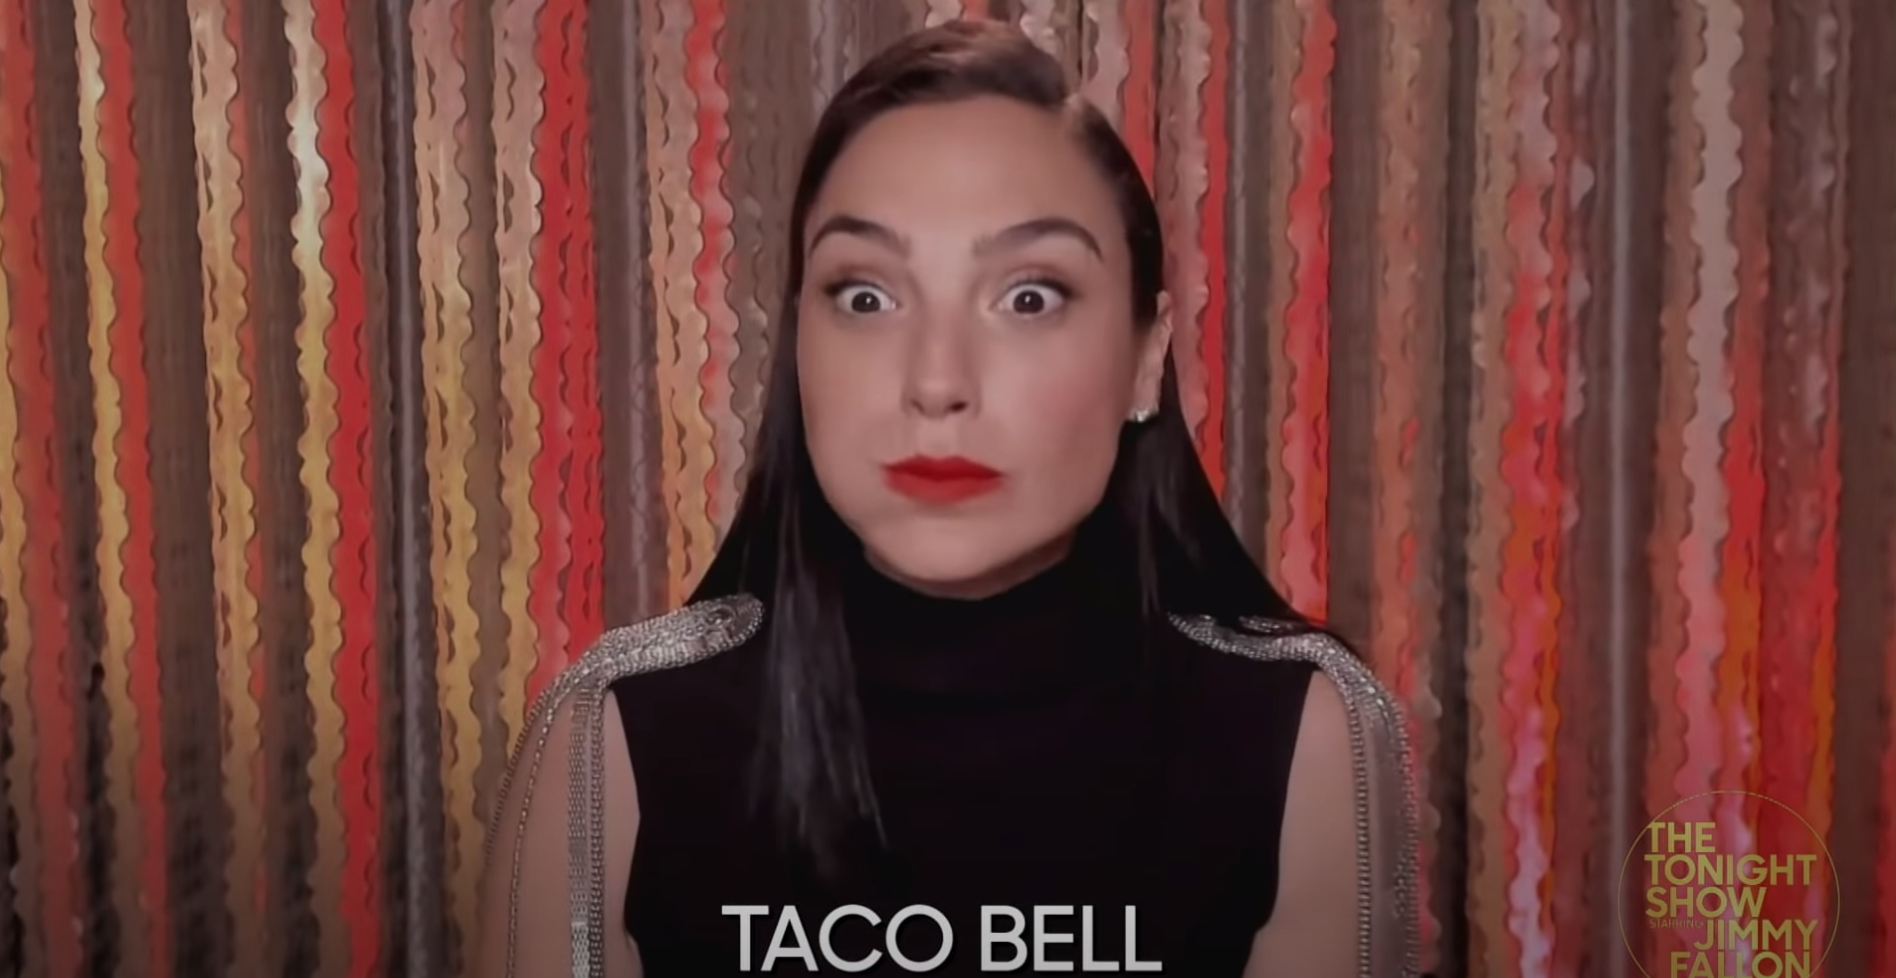 Gal Gadot wide-eyed after her first bite of Taco Bell